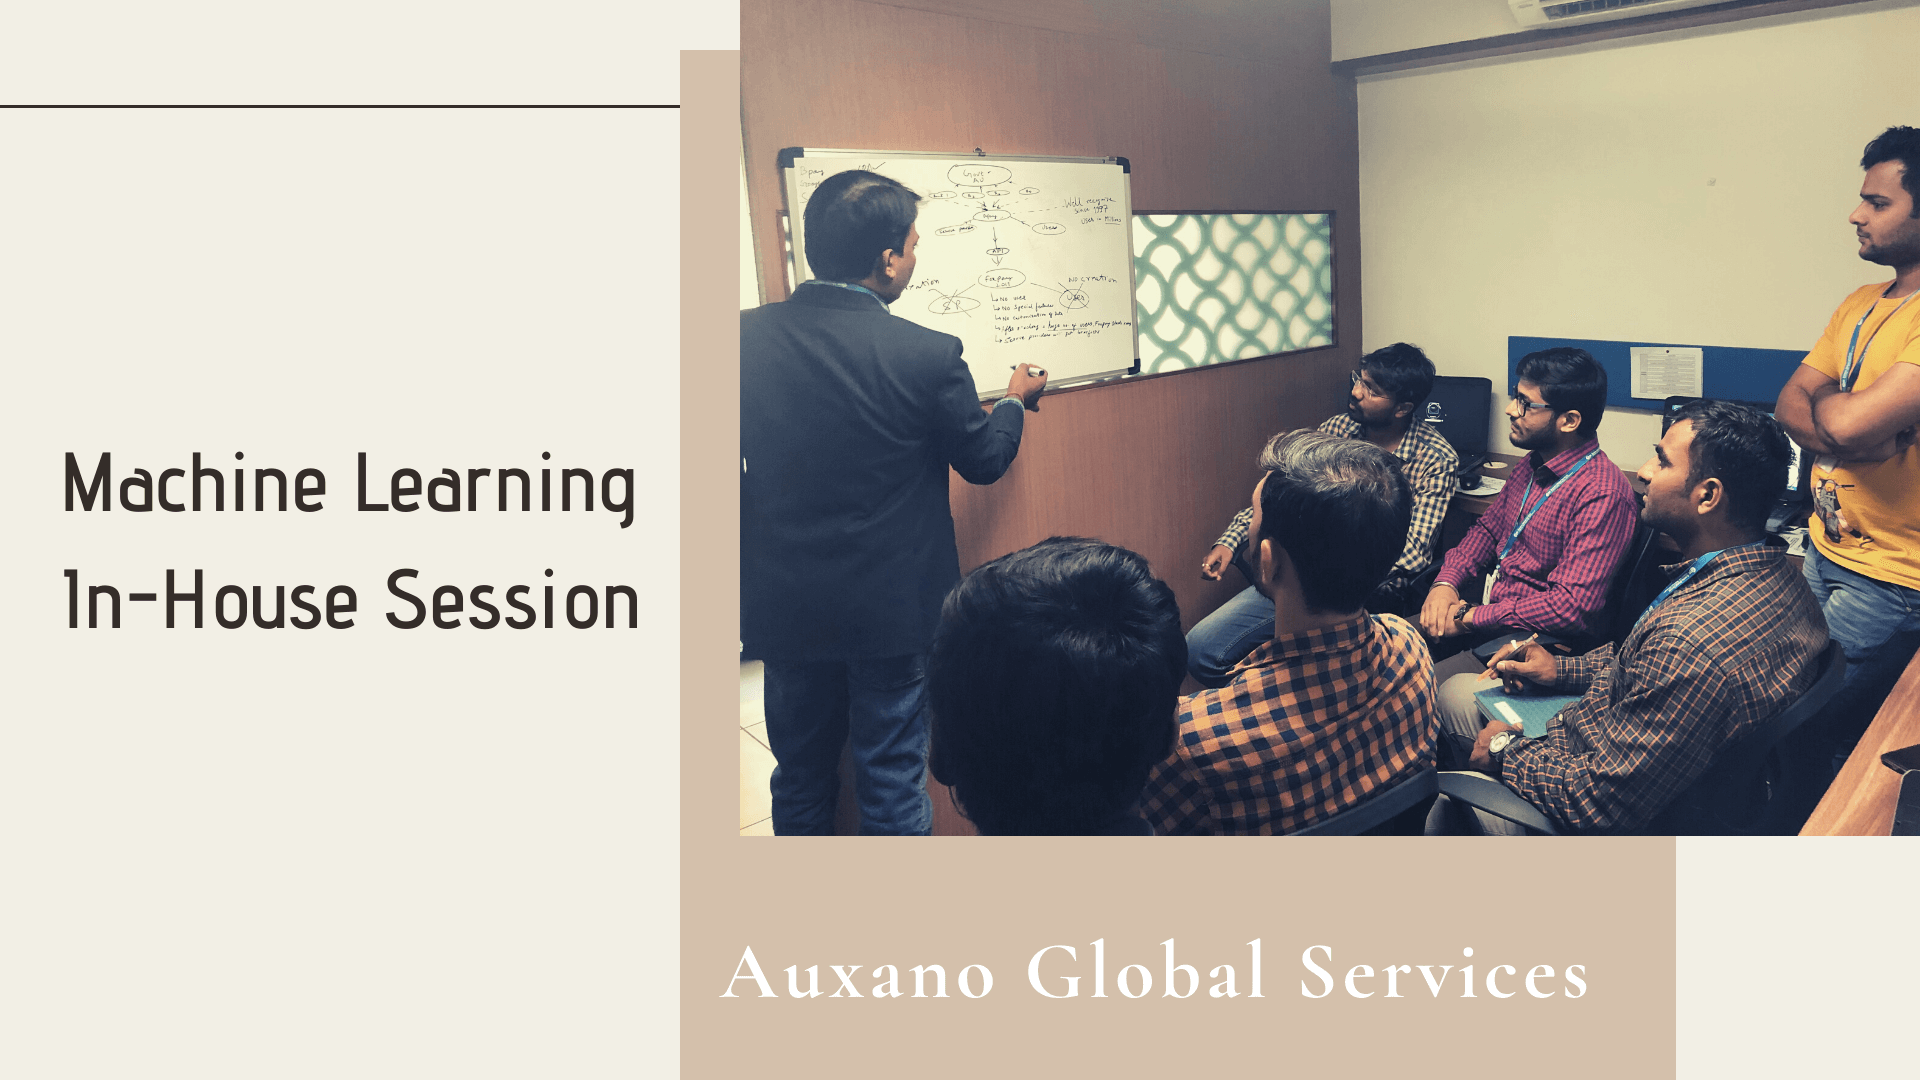 Trip down to the year 2019 at Auxano Global Services